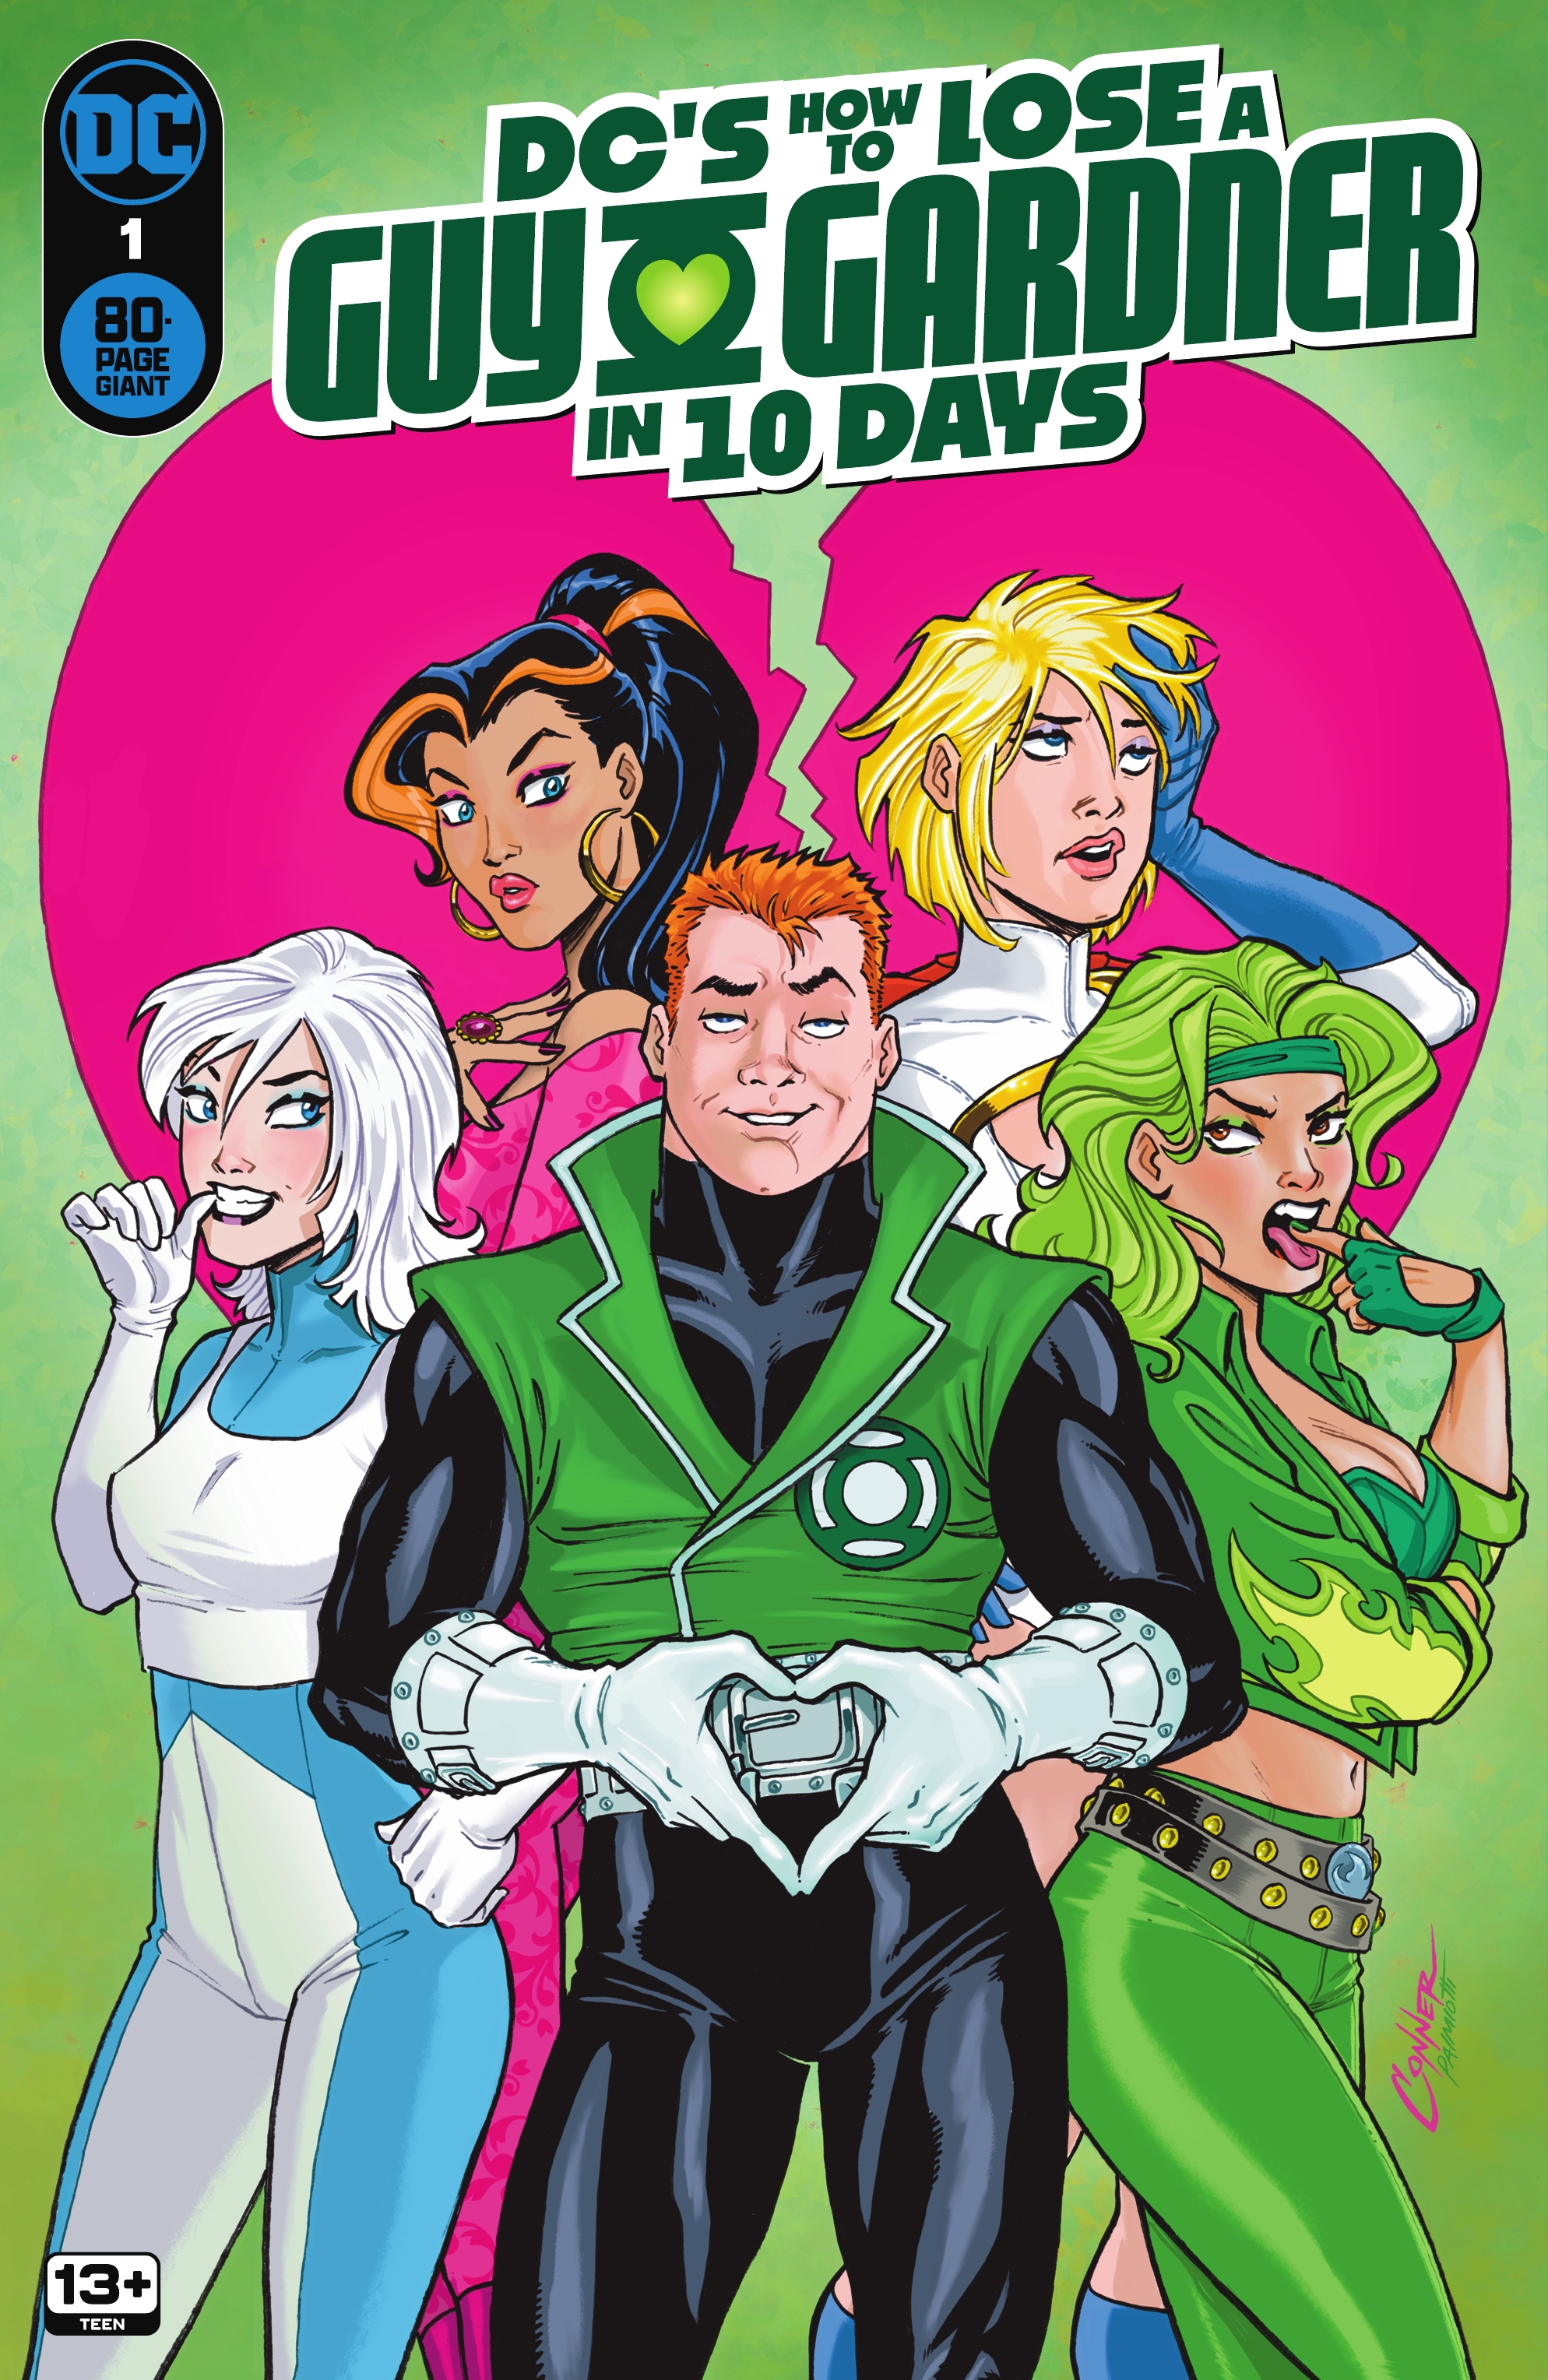 Read online DC's How to Lose a Guy Gardner in 10 Days comic -  Issue # TPB - 1